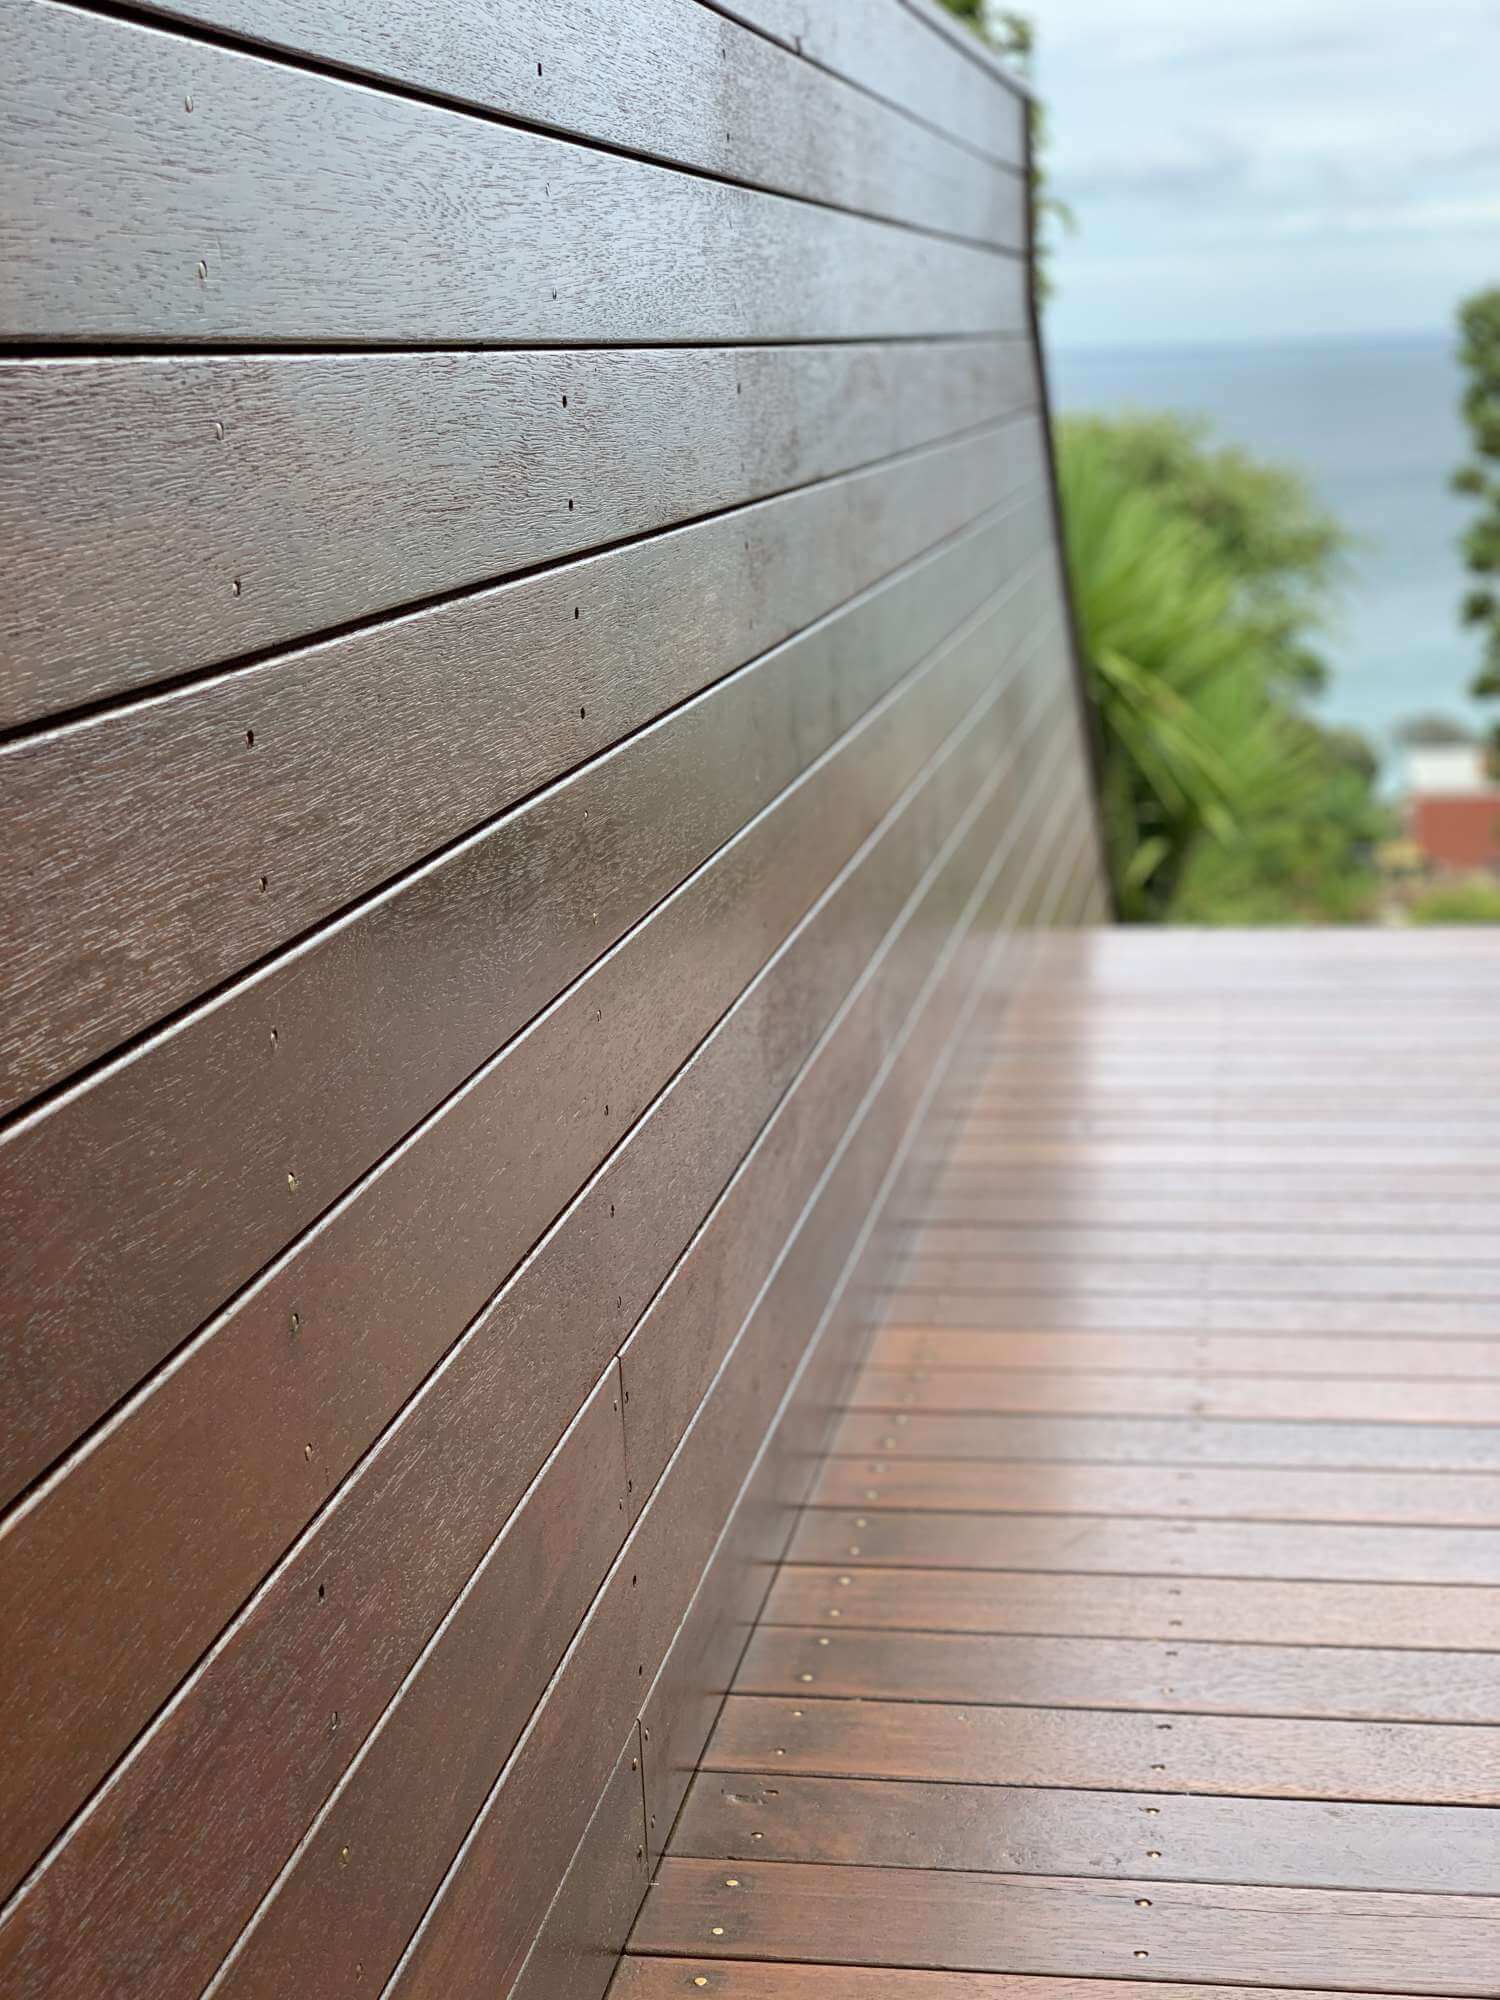 How often should you oil a deck?